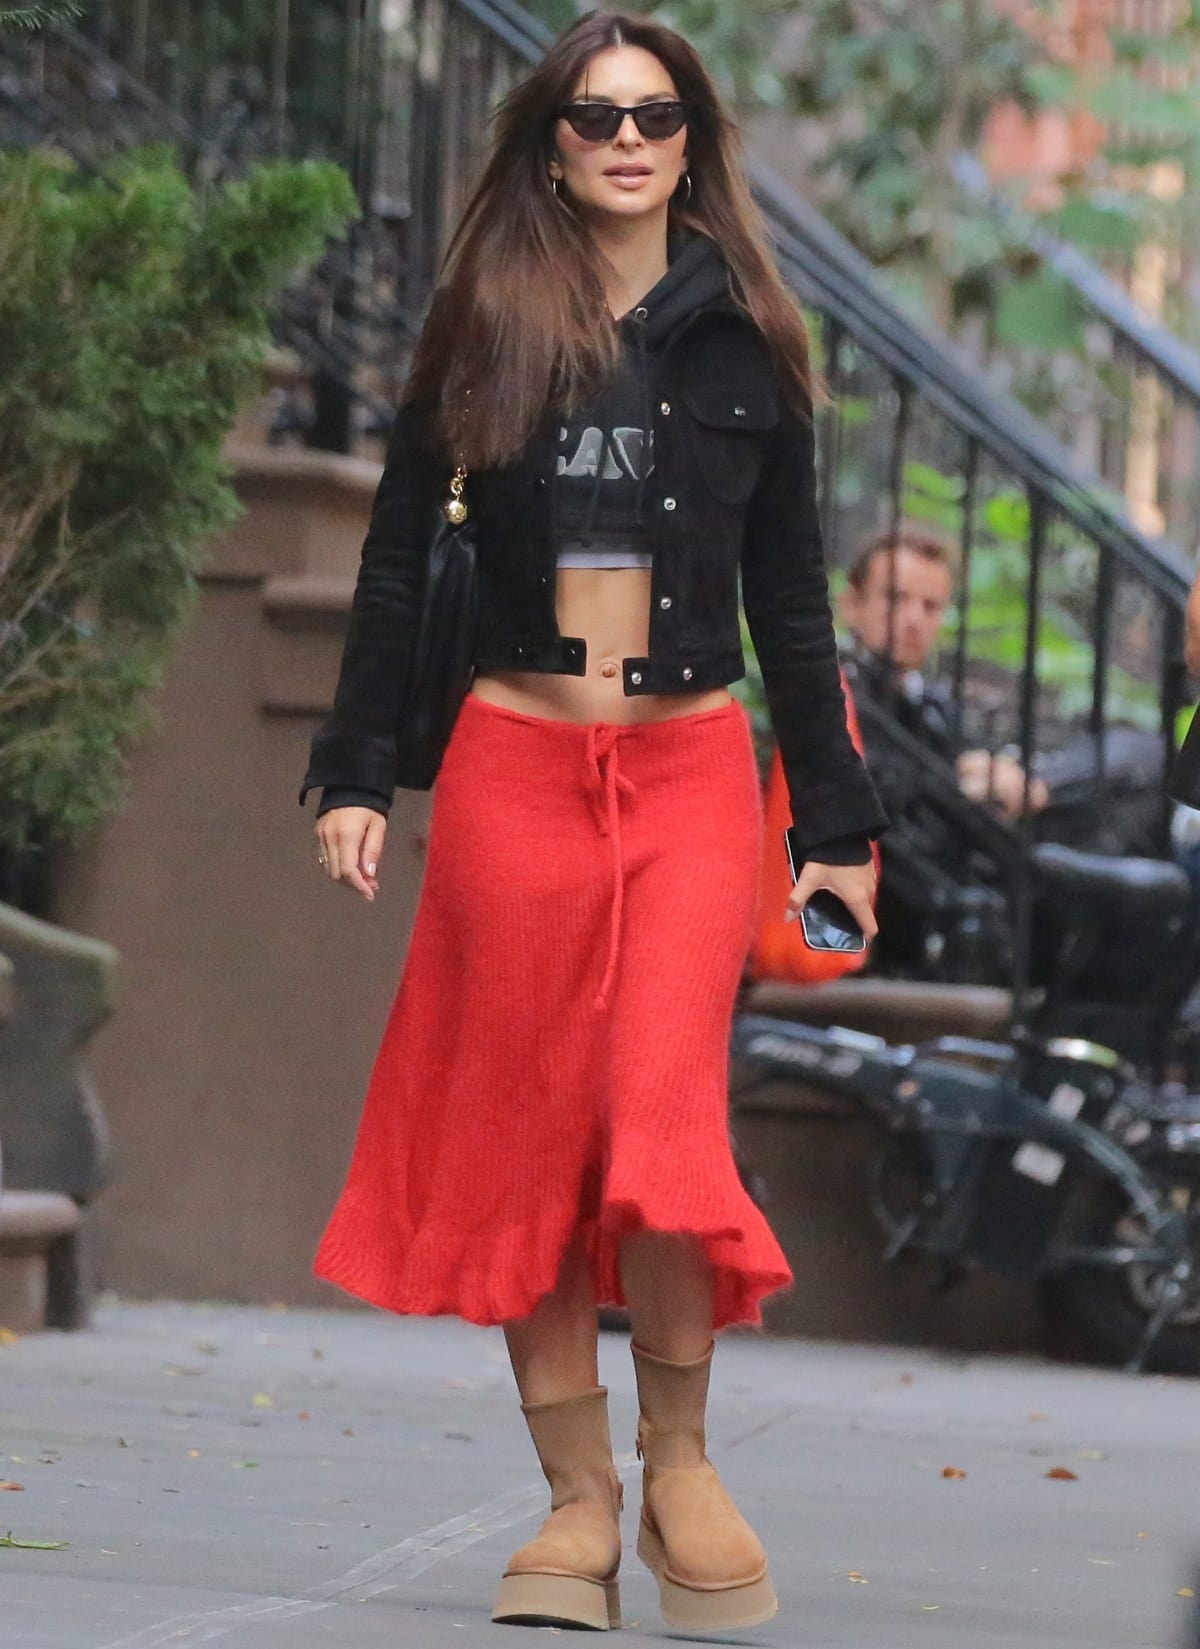 Emily Ratajkowski Pairs Low-Rise Red Skirt and UGG Boots for Unexpected ...